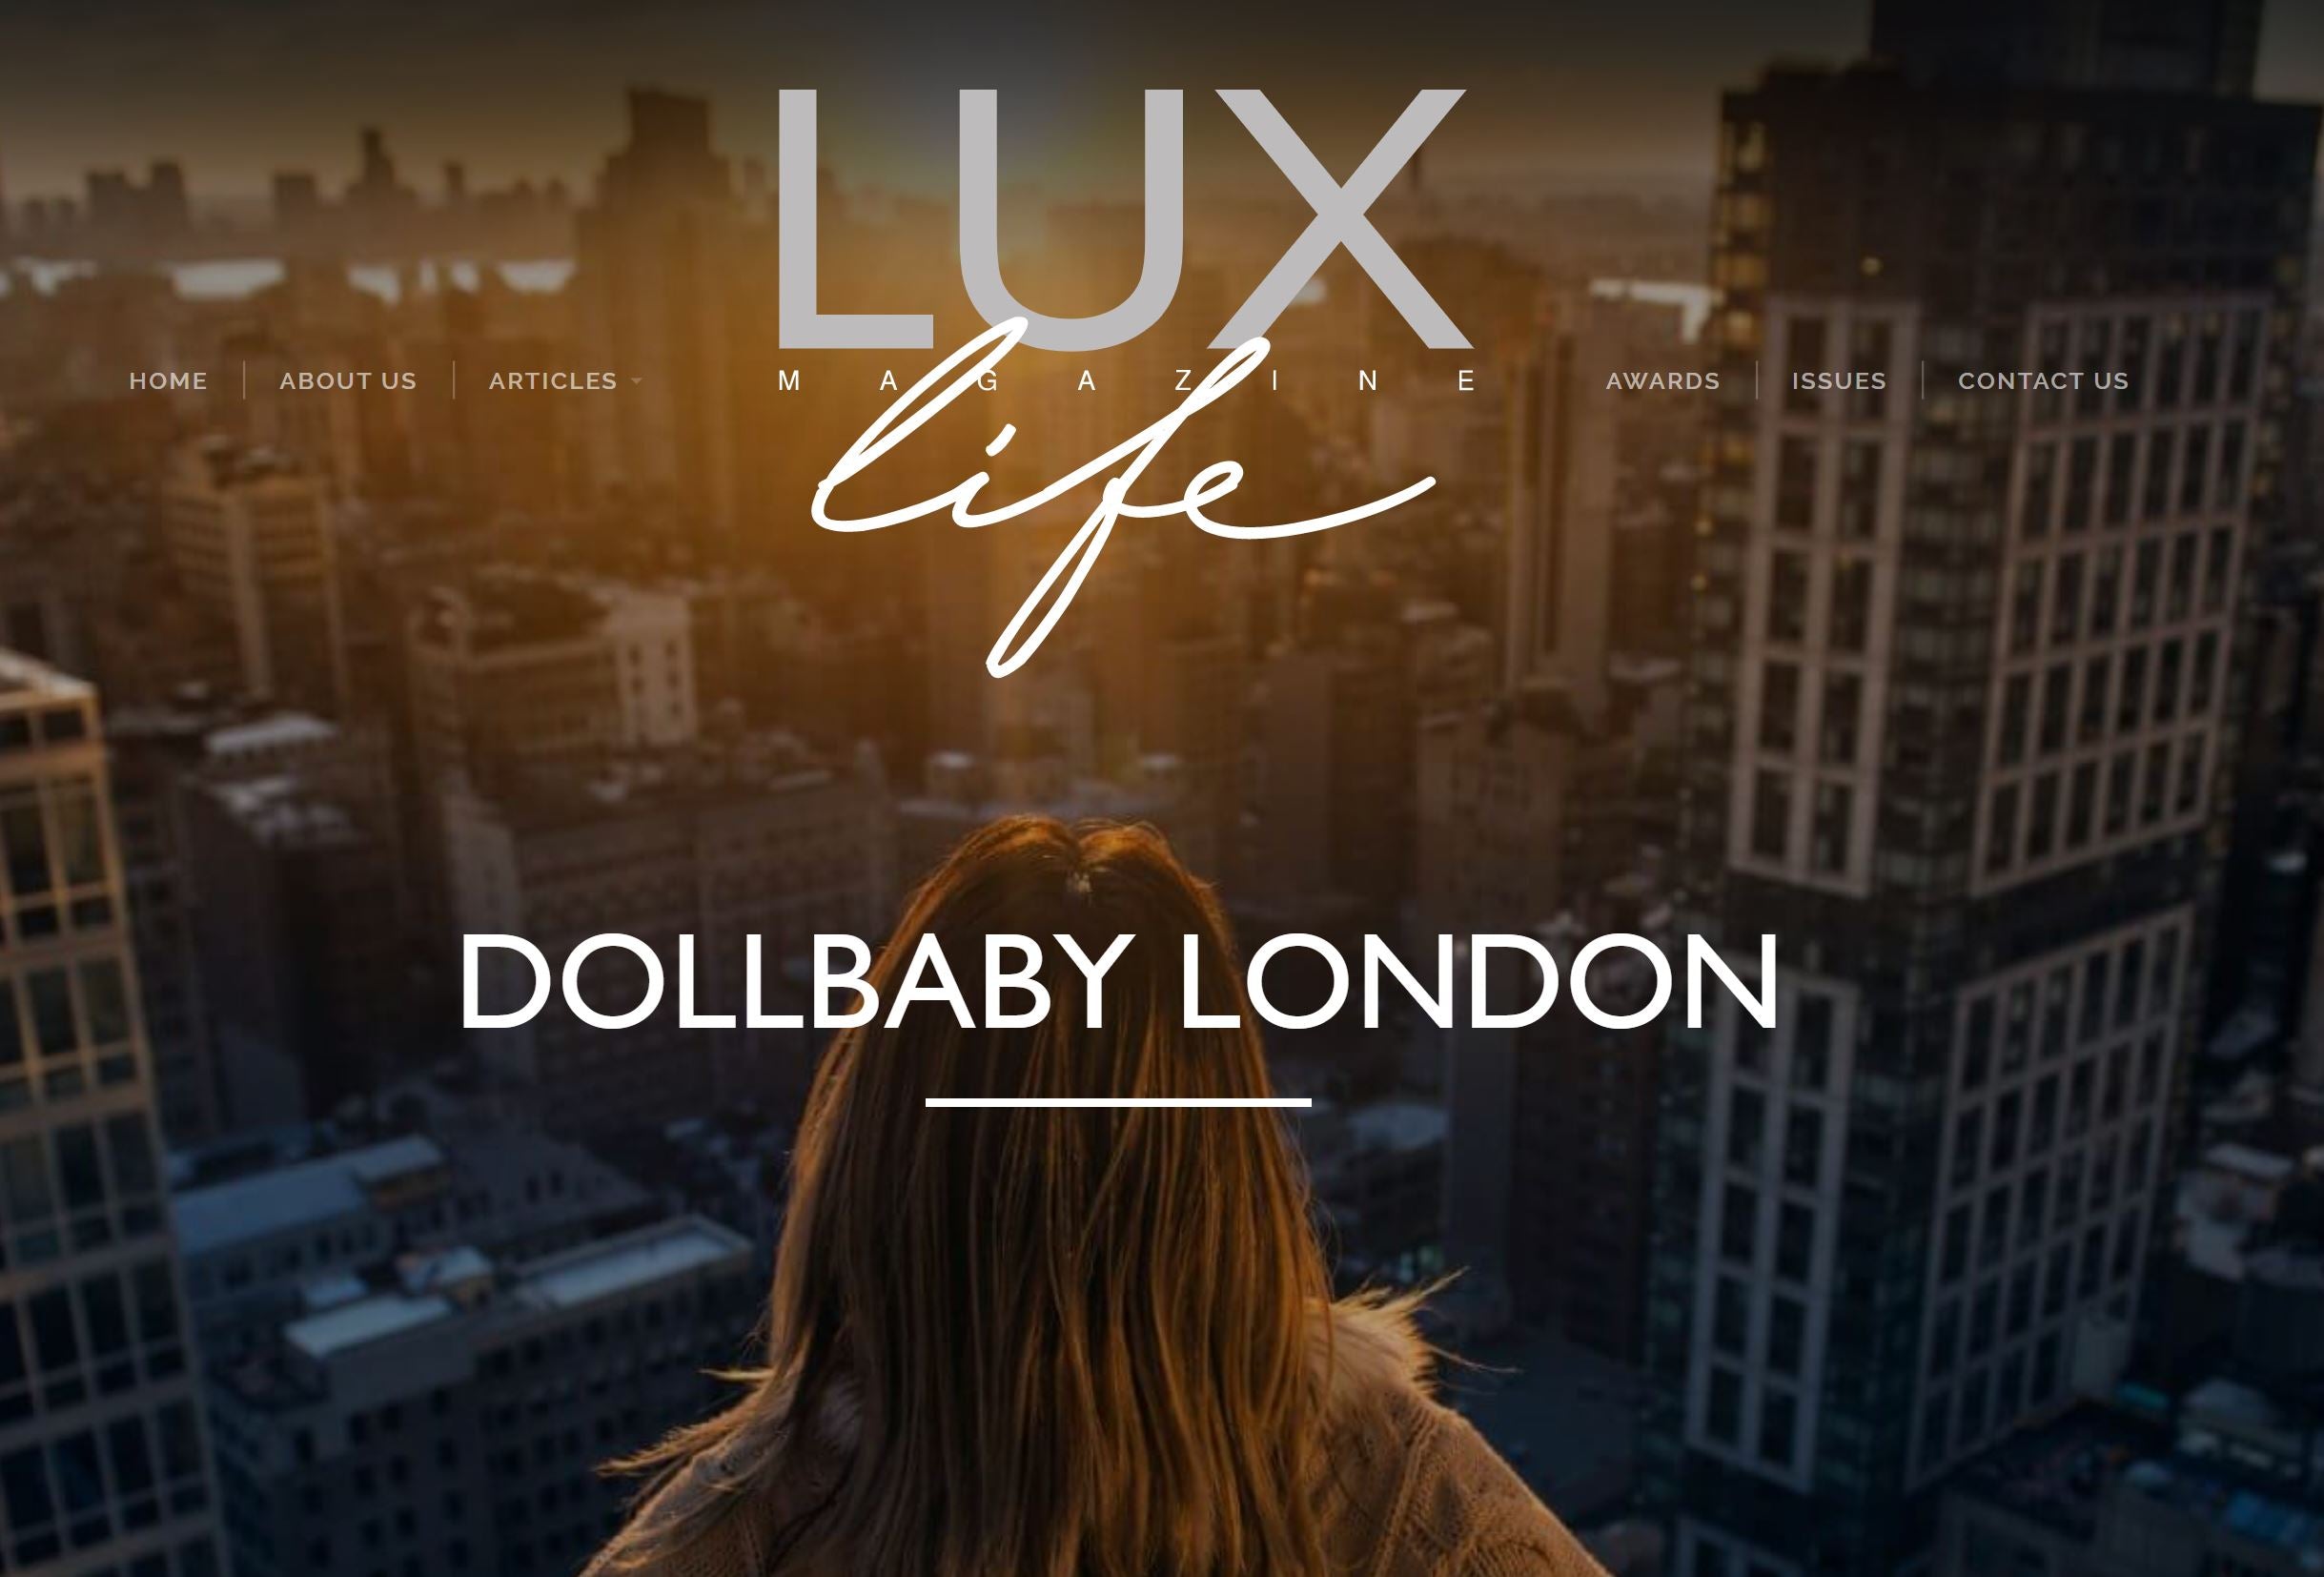 Dollbaby London Wins Two Awards at the Lux Life Magazine Health Beauty & Wellness Awards 2020!